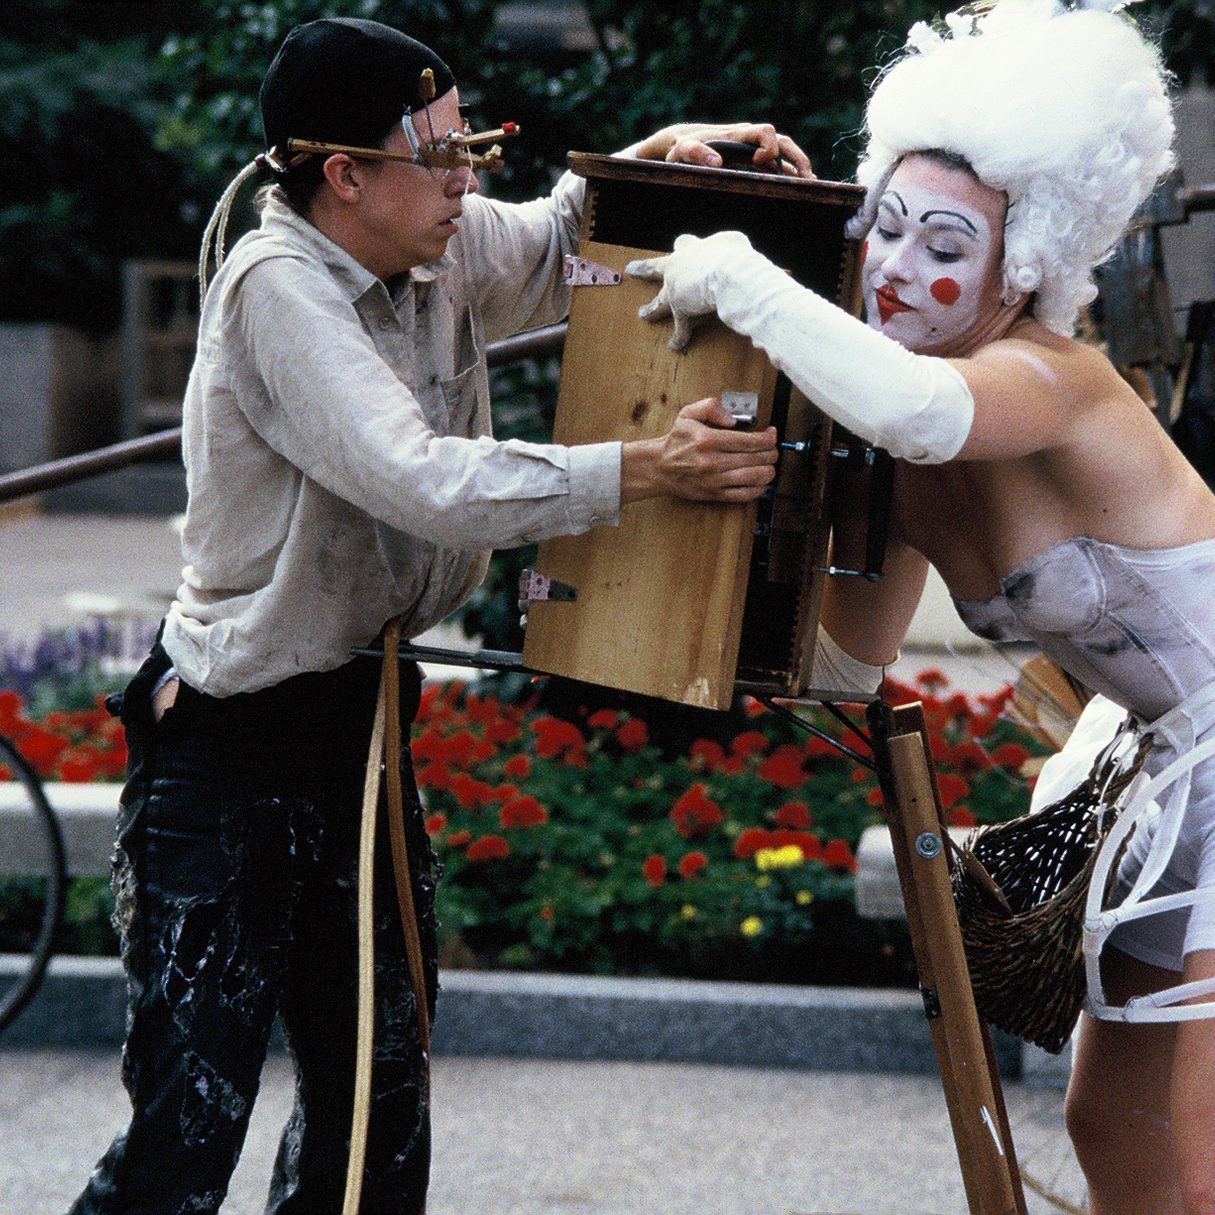 The Eye in the Door by Charles Campbell and Steve Epley, August 1999 - photos street performers